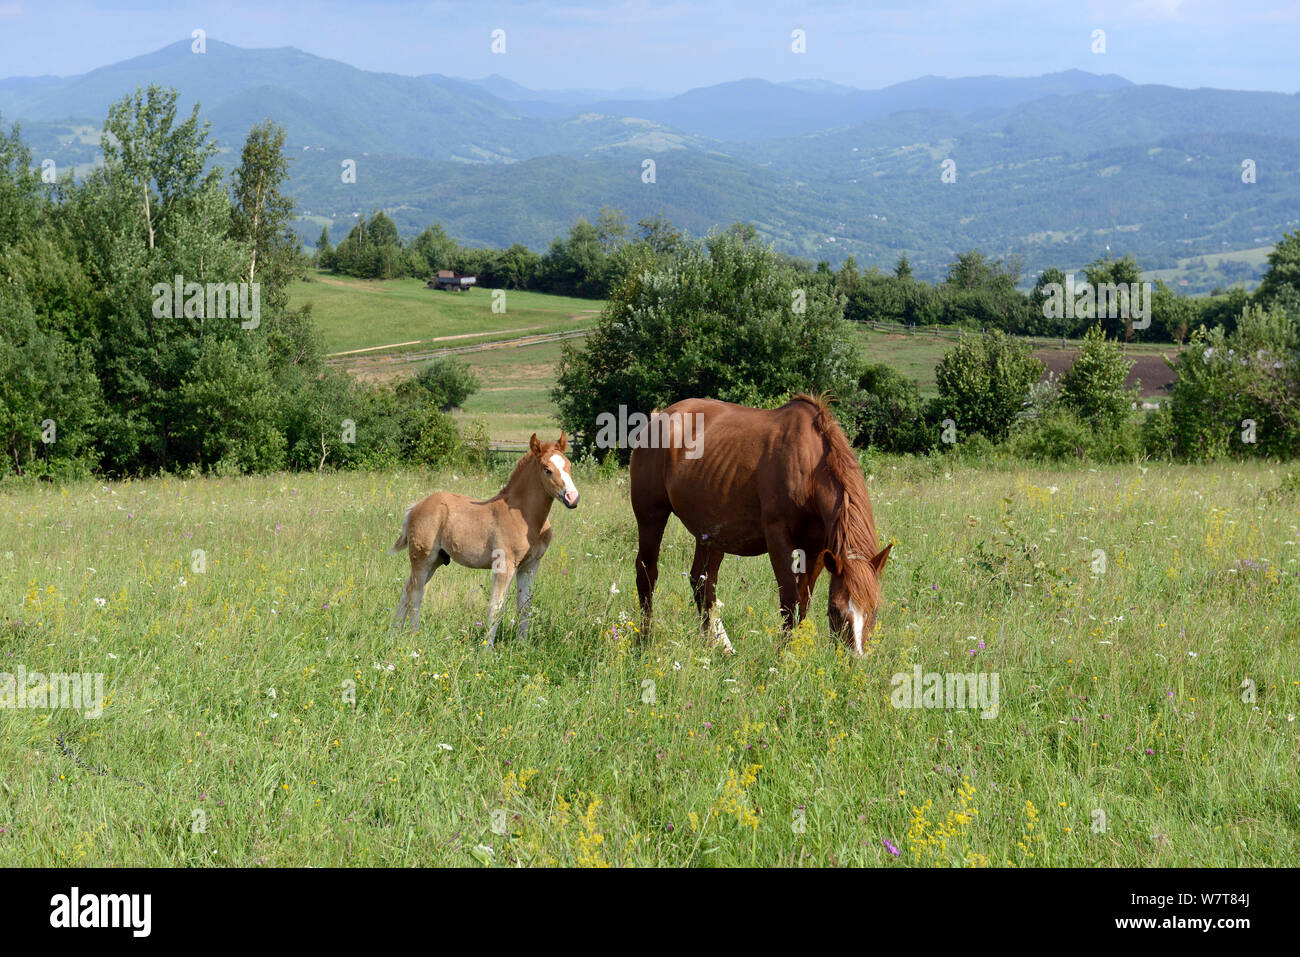 Foal and mare (Equus caballus) in flower-rich pasture in the foothills of the Carpathian Mountains, Ukraine, June 2013. Stock Photo